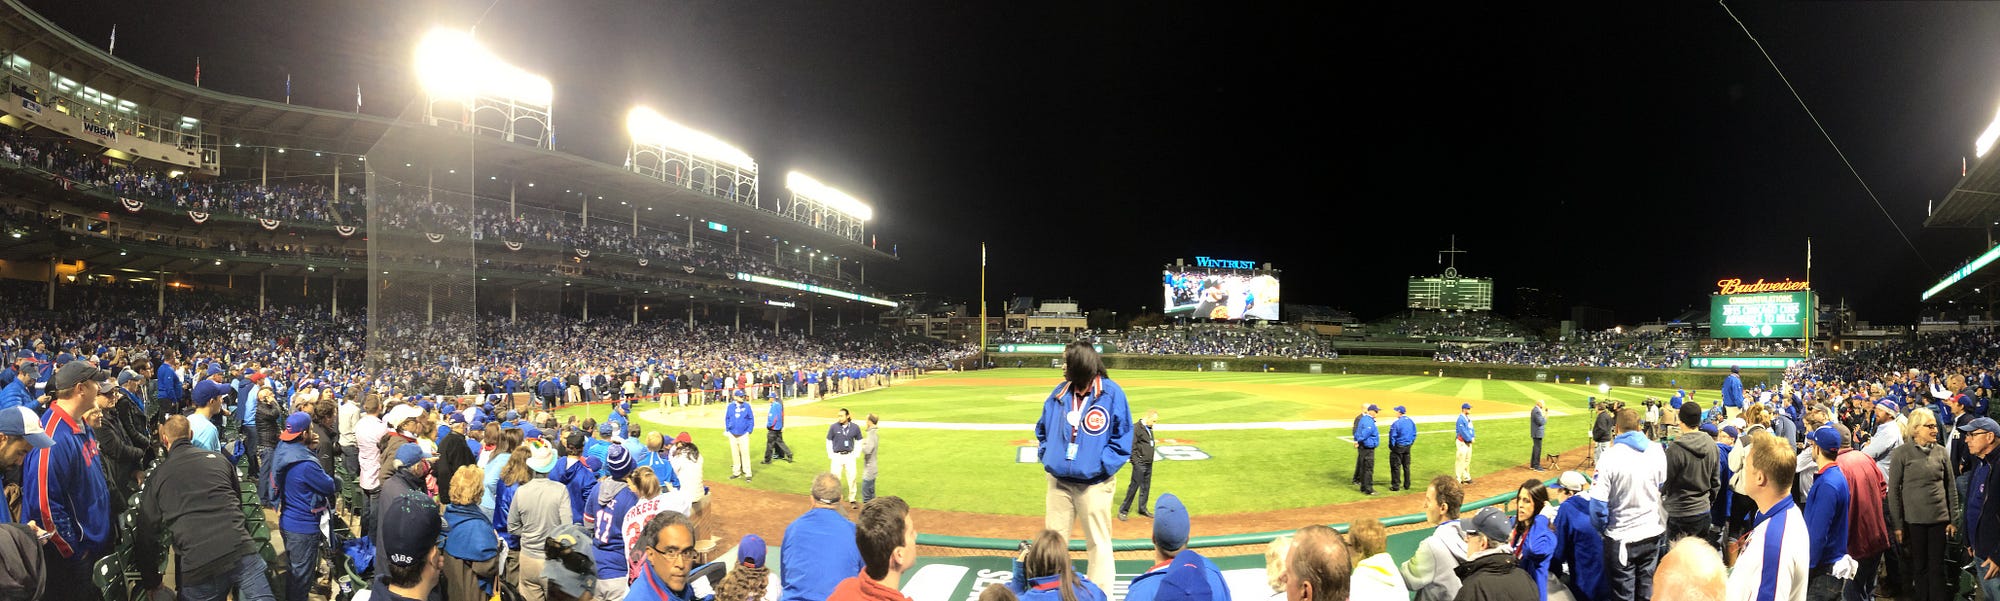 Michigan Cubs fans head to Wrigley hoping to witness history